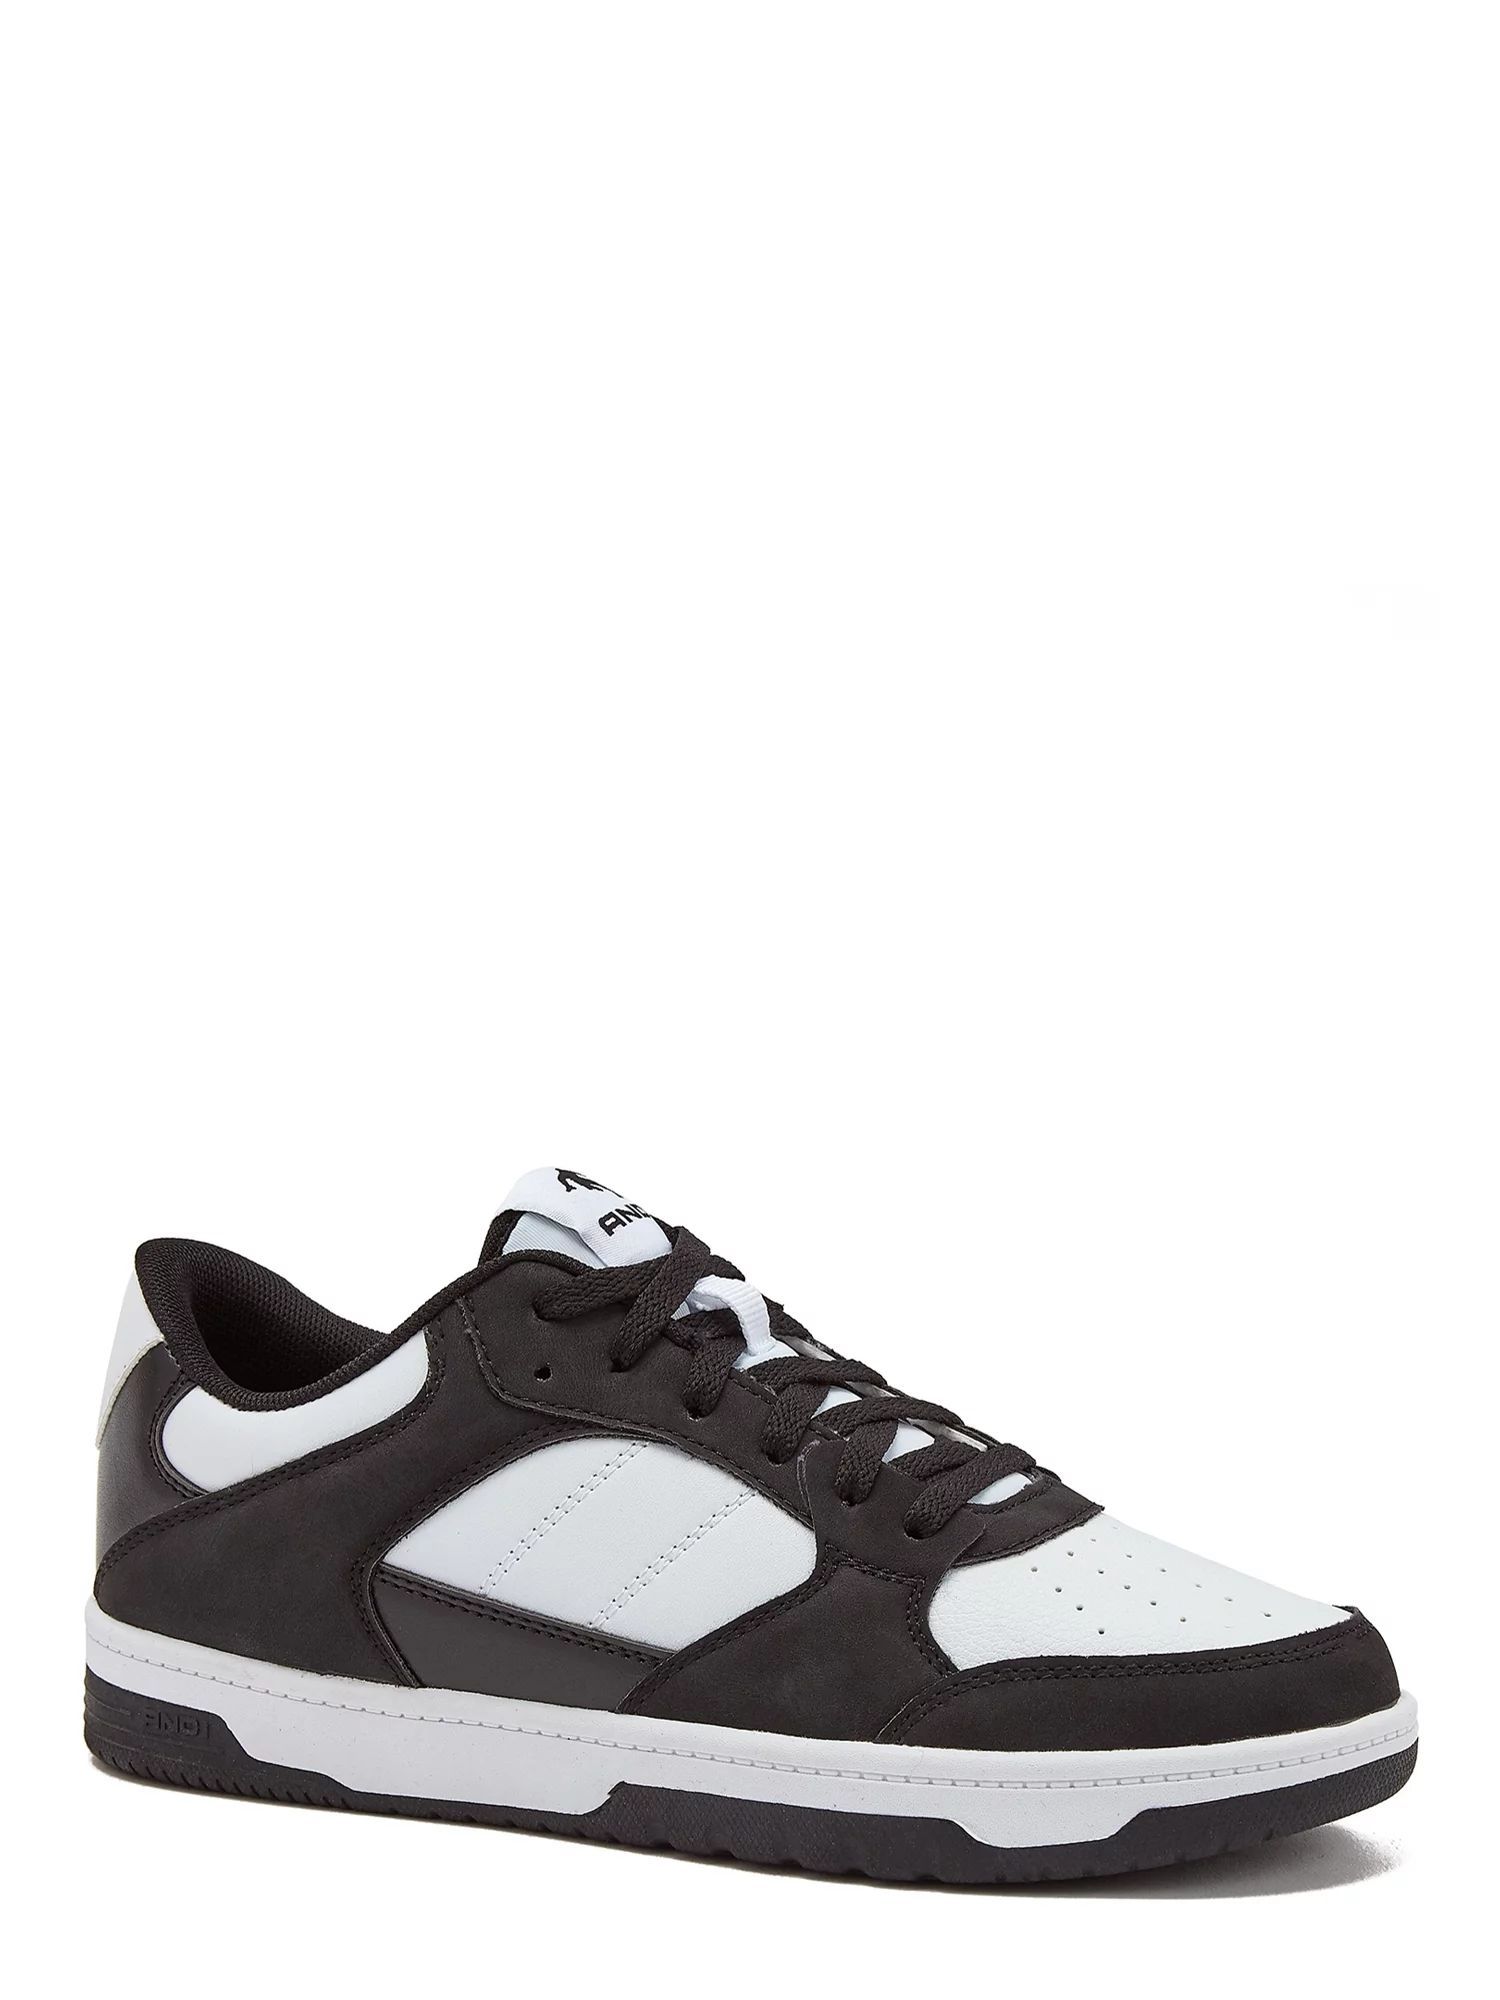 AND1 Women’s Low Top Basketball Sneakers, Wide Width Available | Walmart (US)